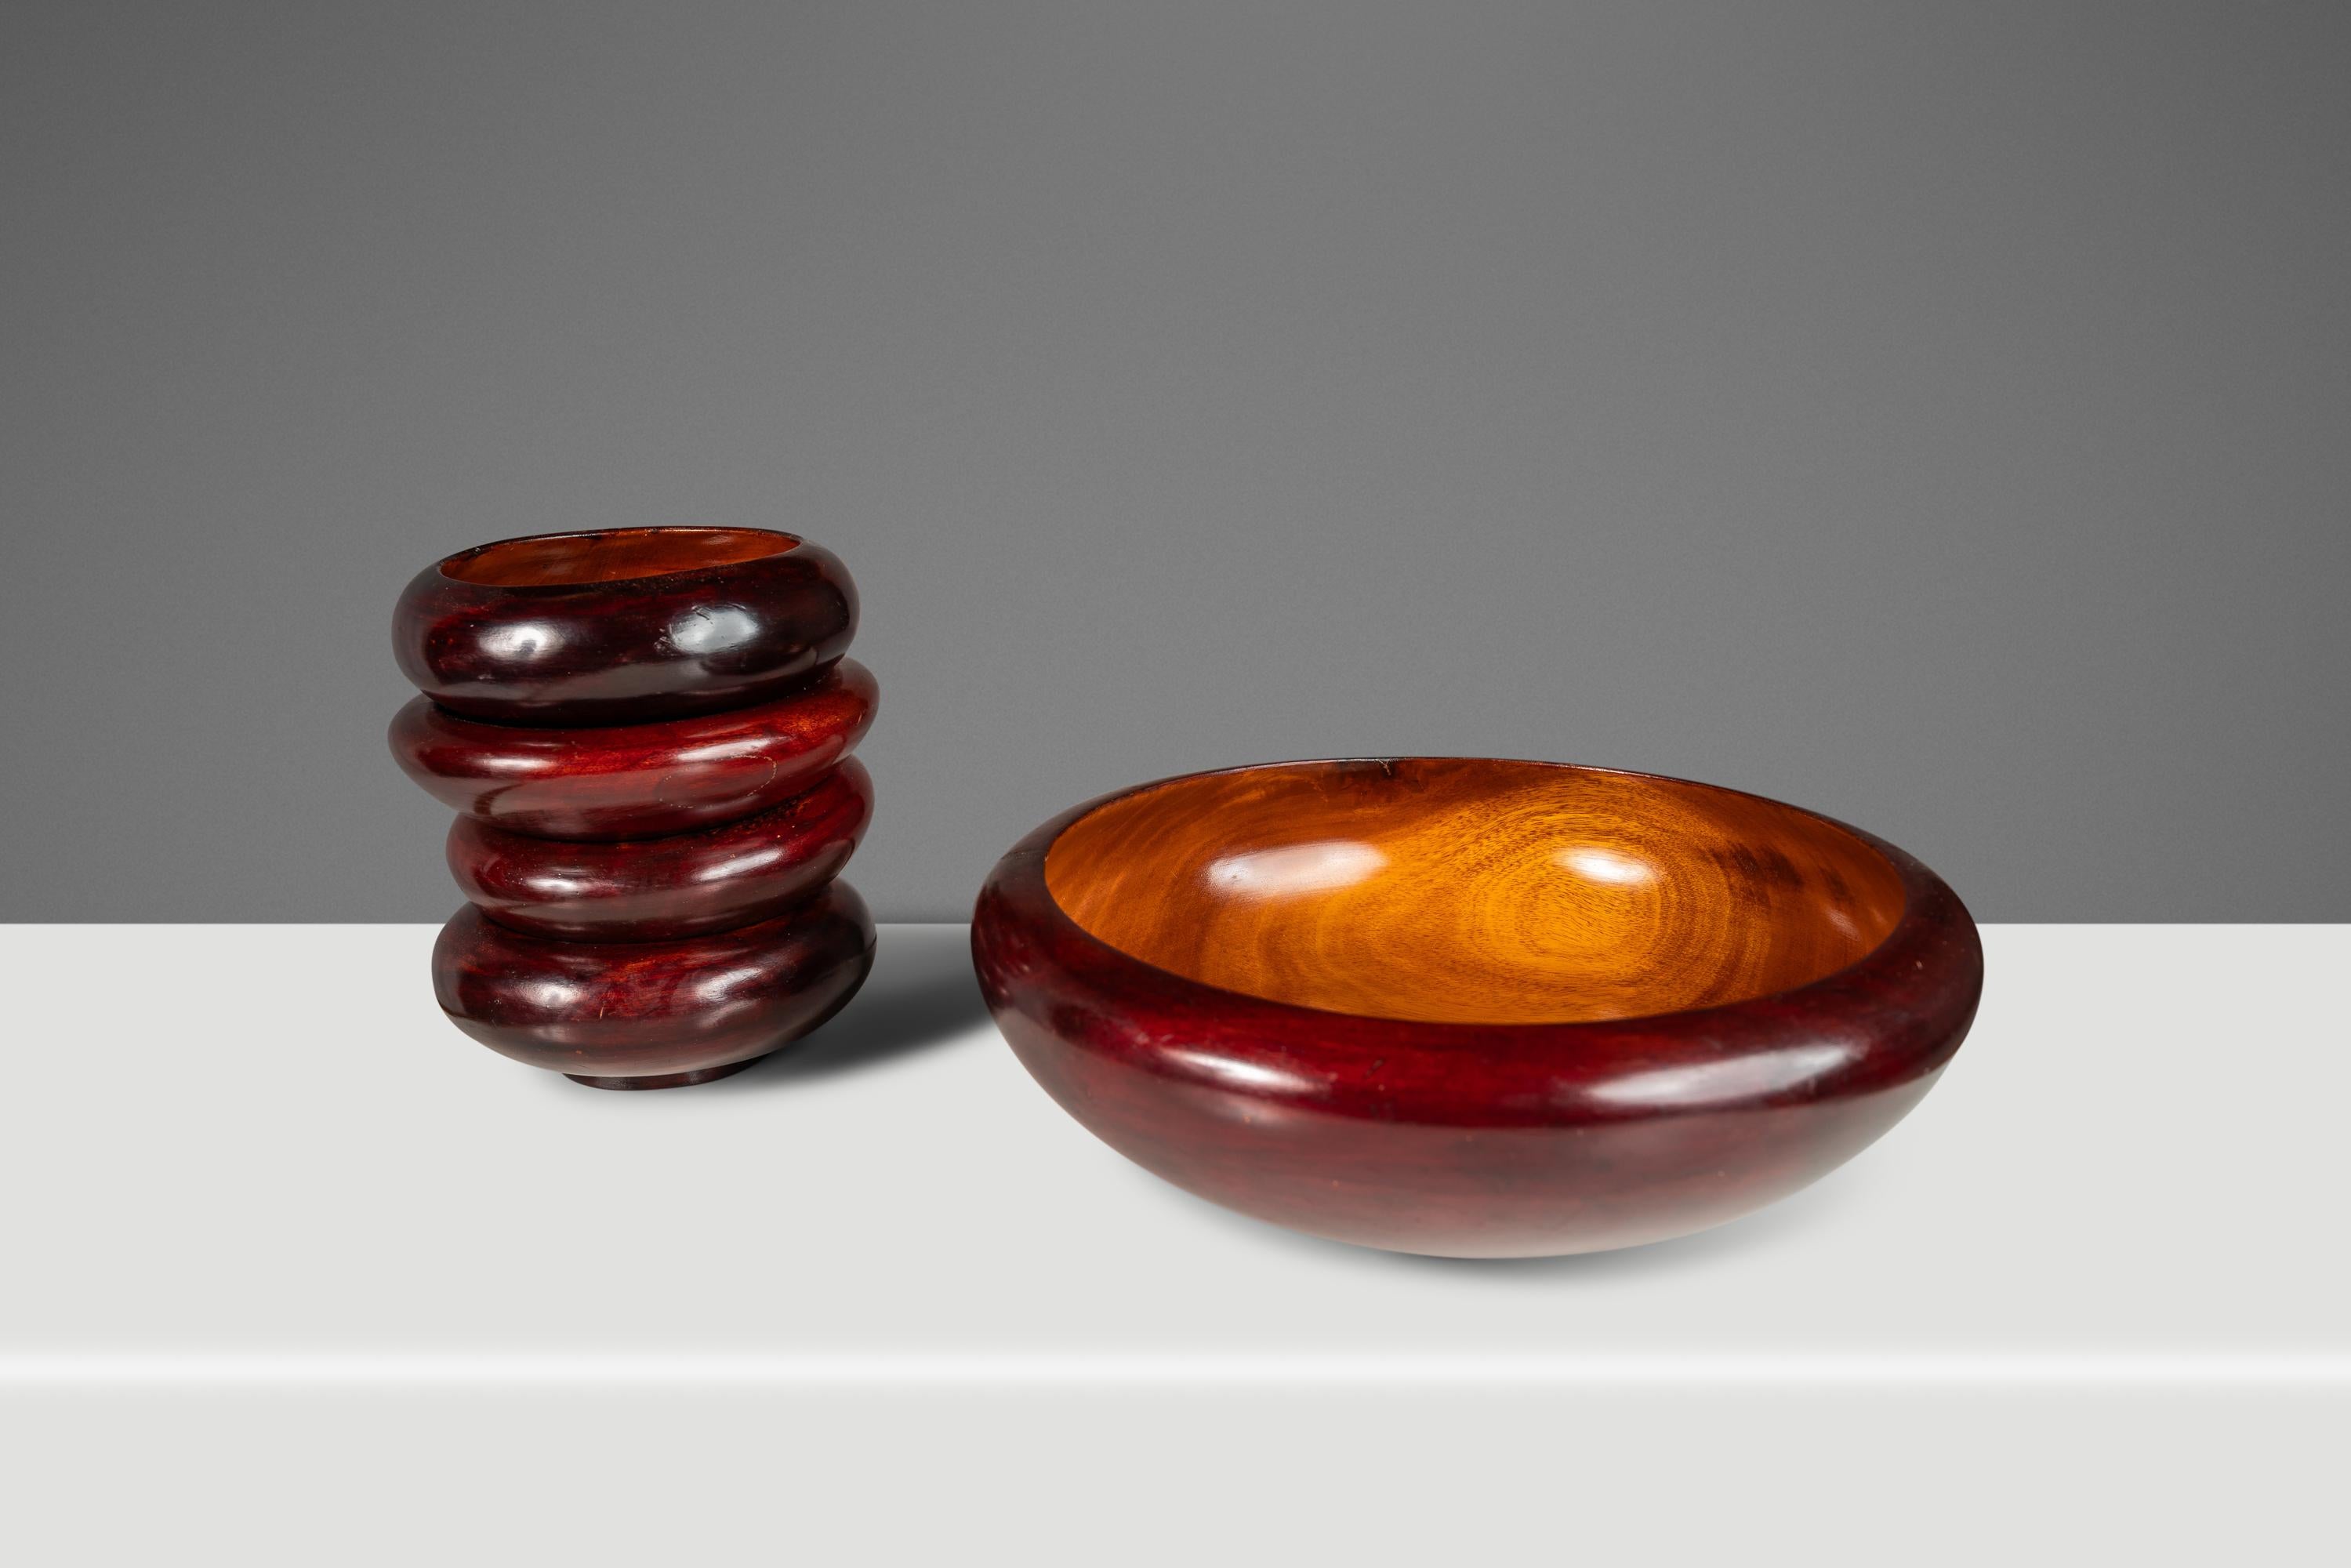 Organic Modern Minimalist Hand-Turned Serving Bowls in Solid Cherry Wood, USA, c. 1960's For Sale